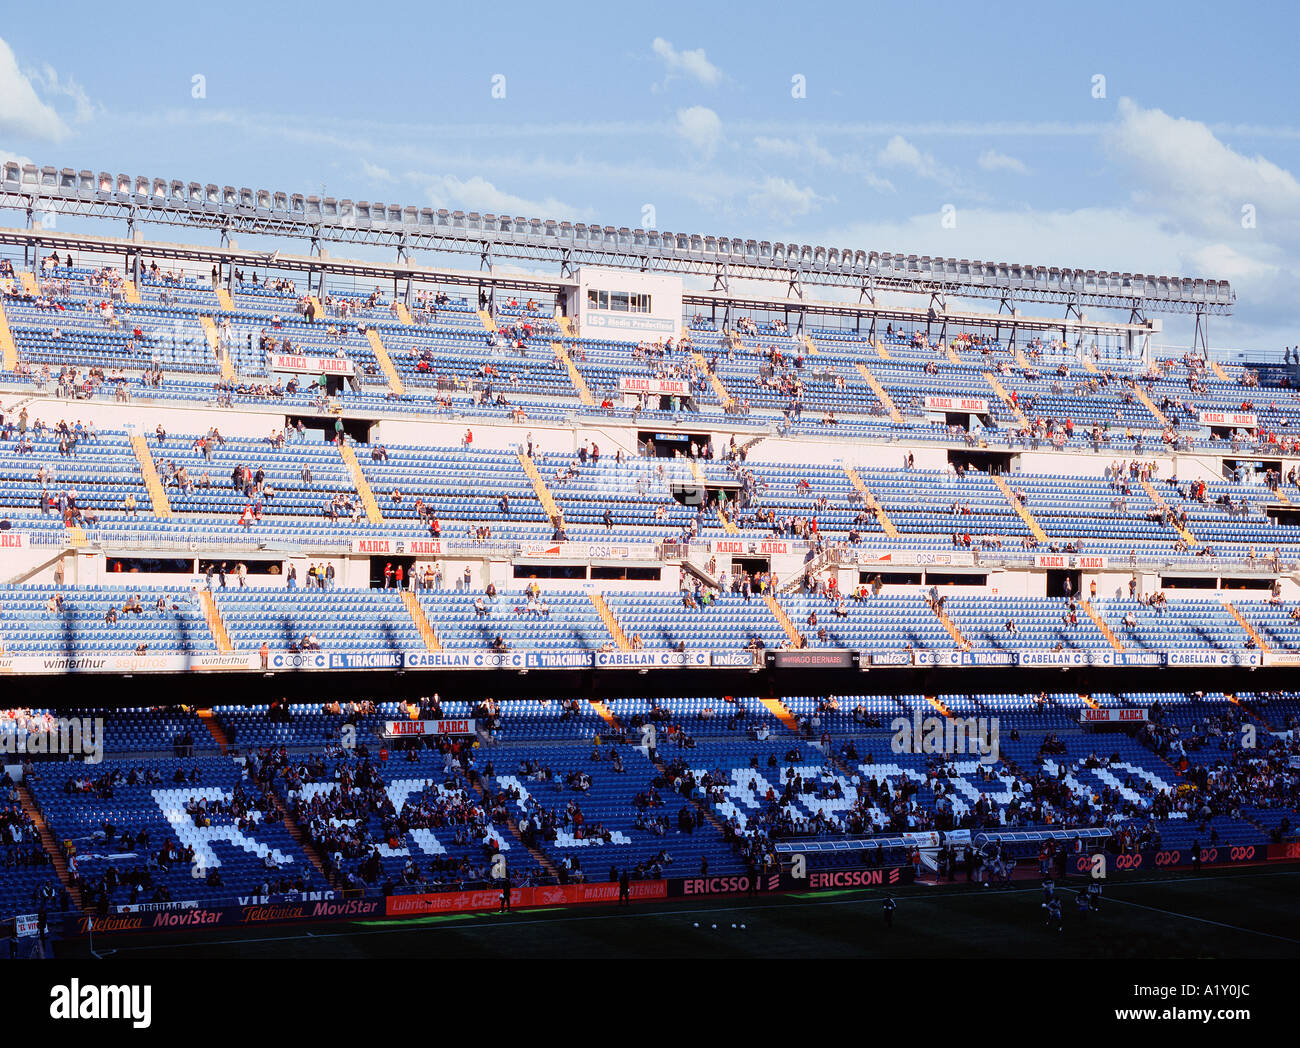 Real Madrid Stadium High Resolution Stock Photography and Images - Alamy